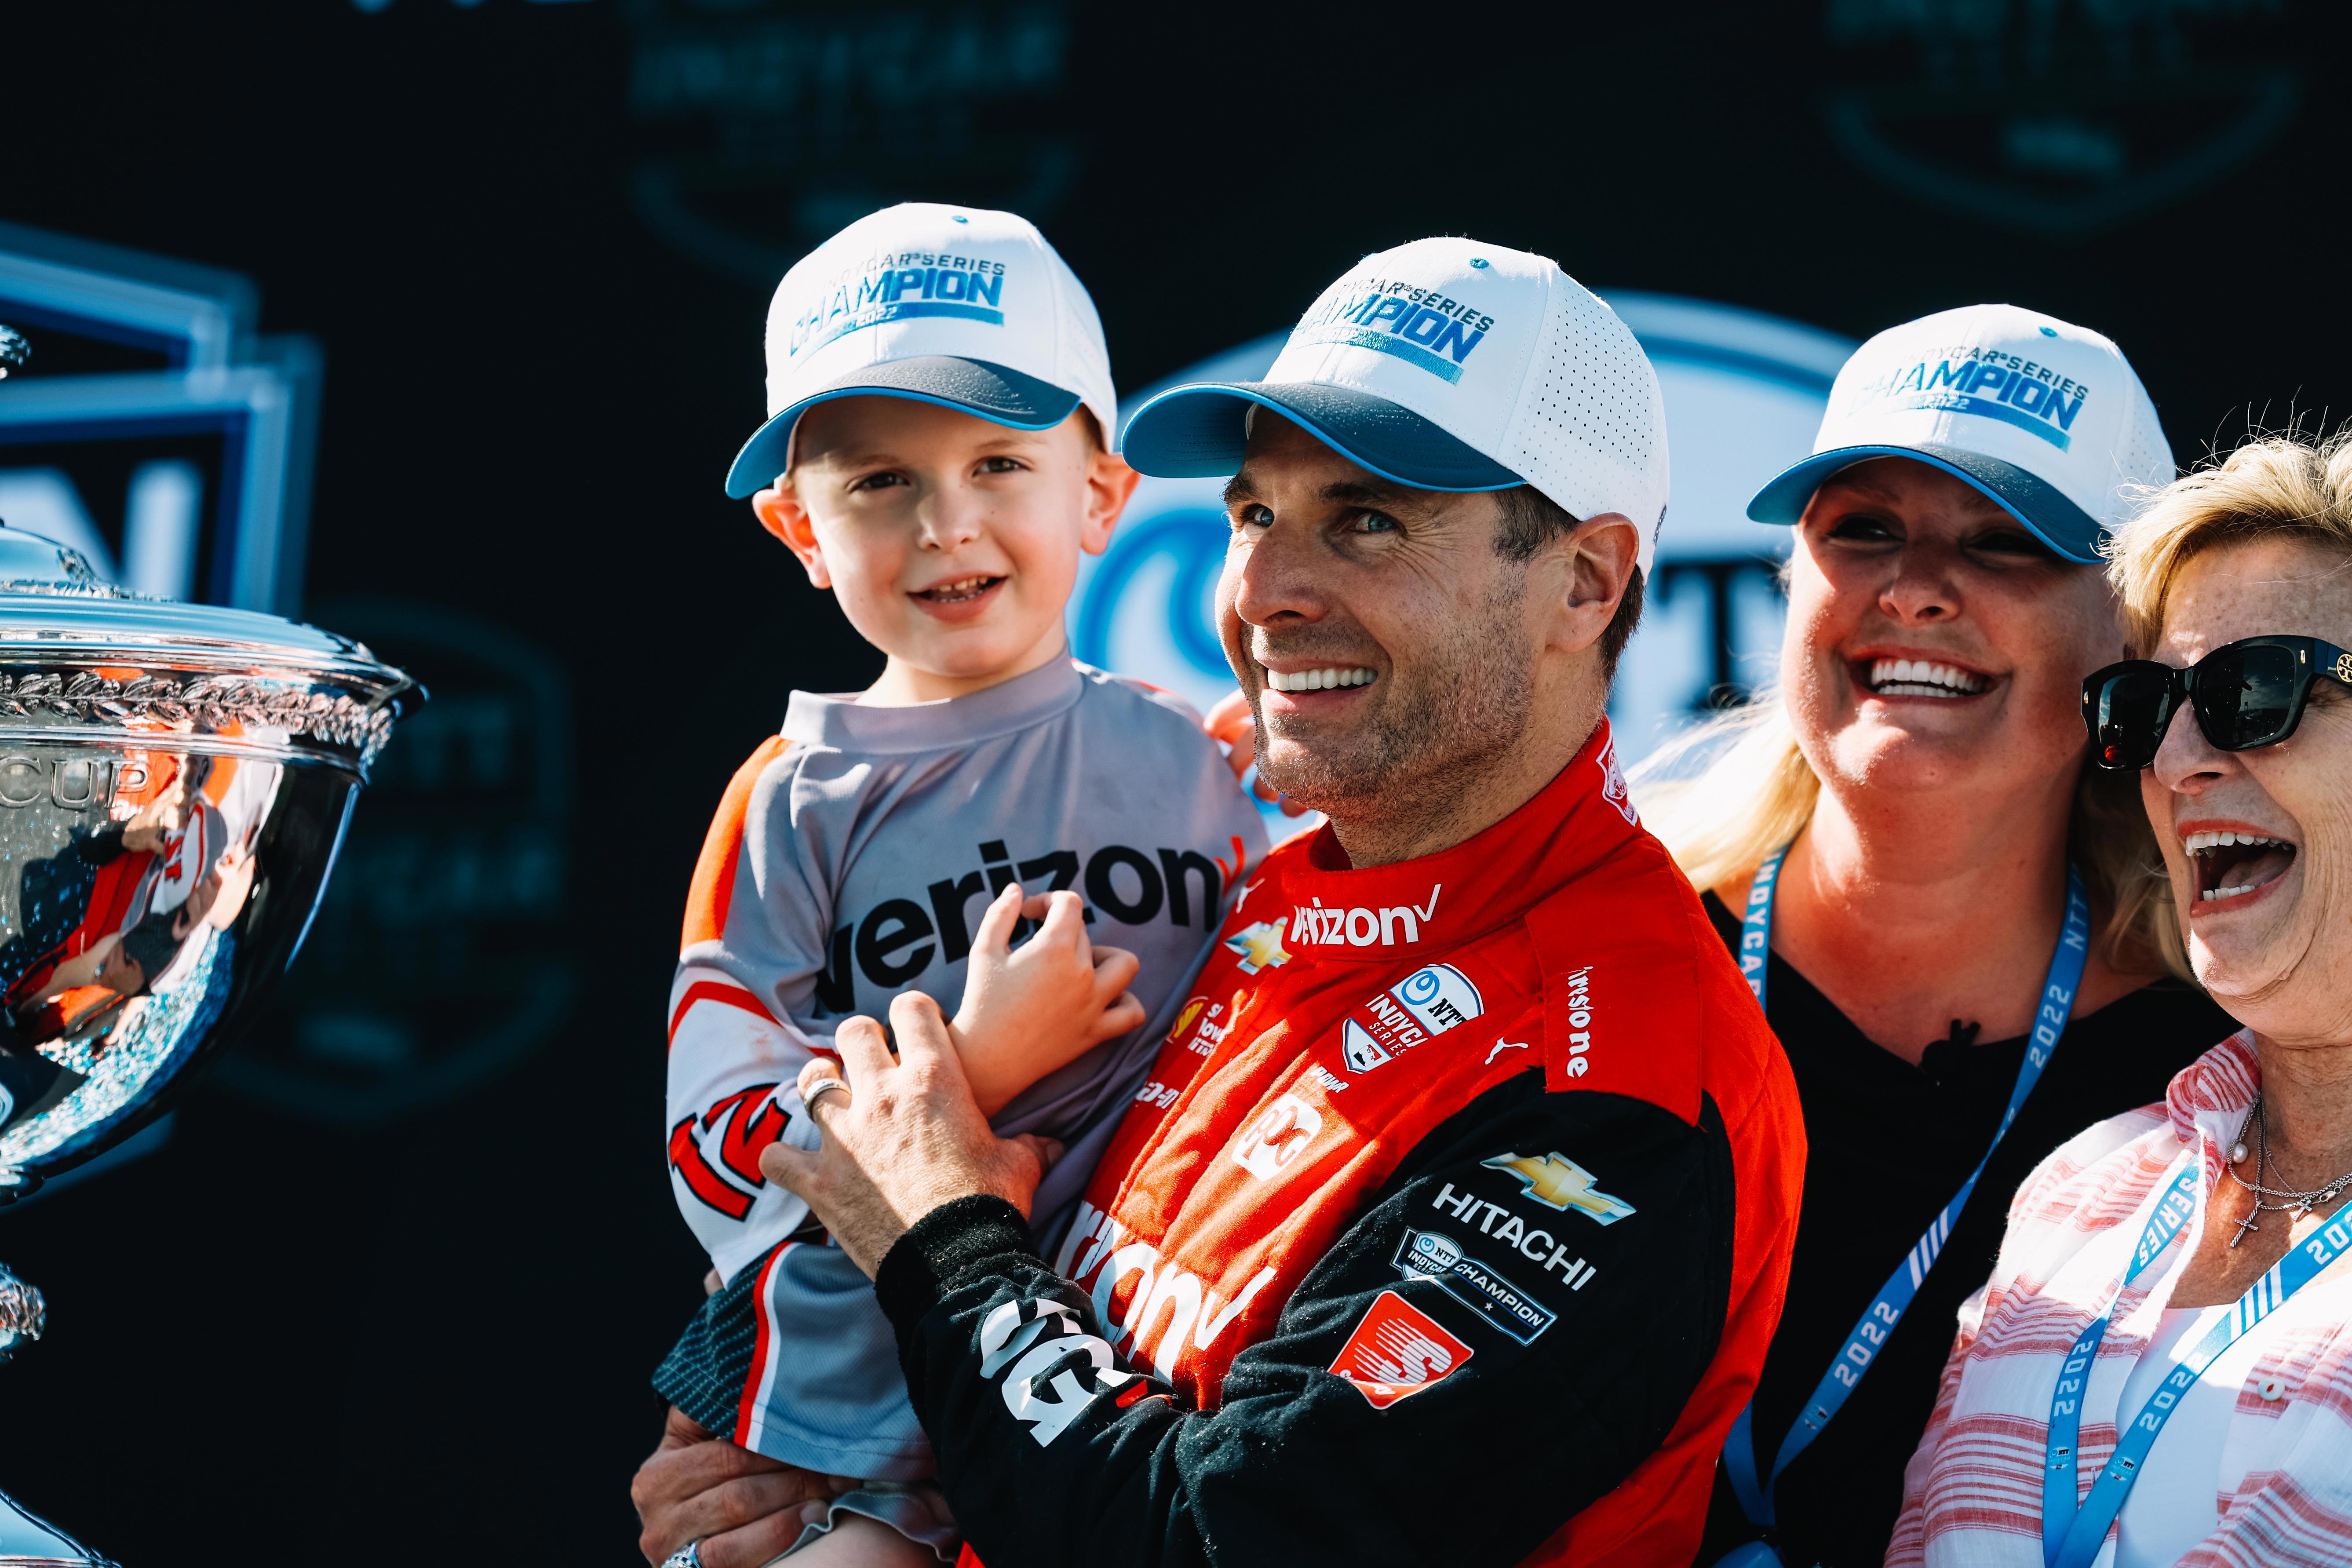 IndyCar champion Will Power credits career confidence to wife's